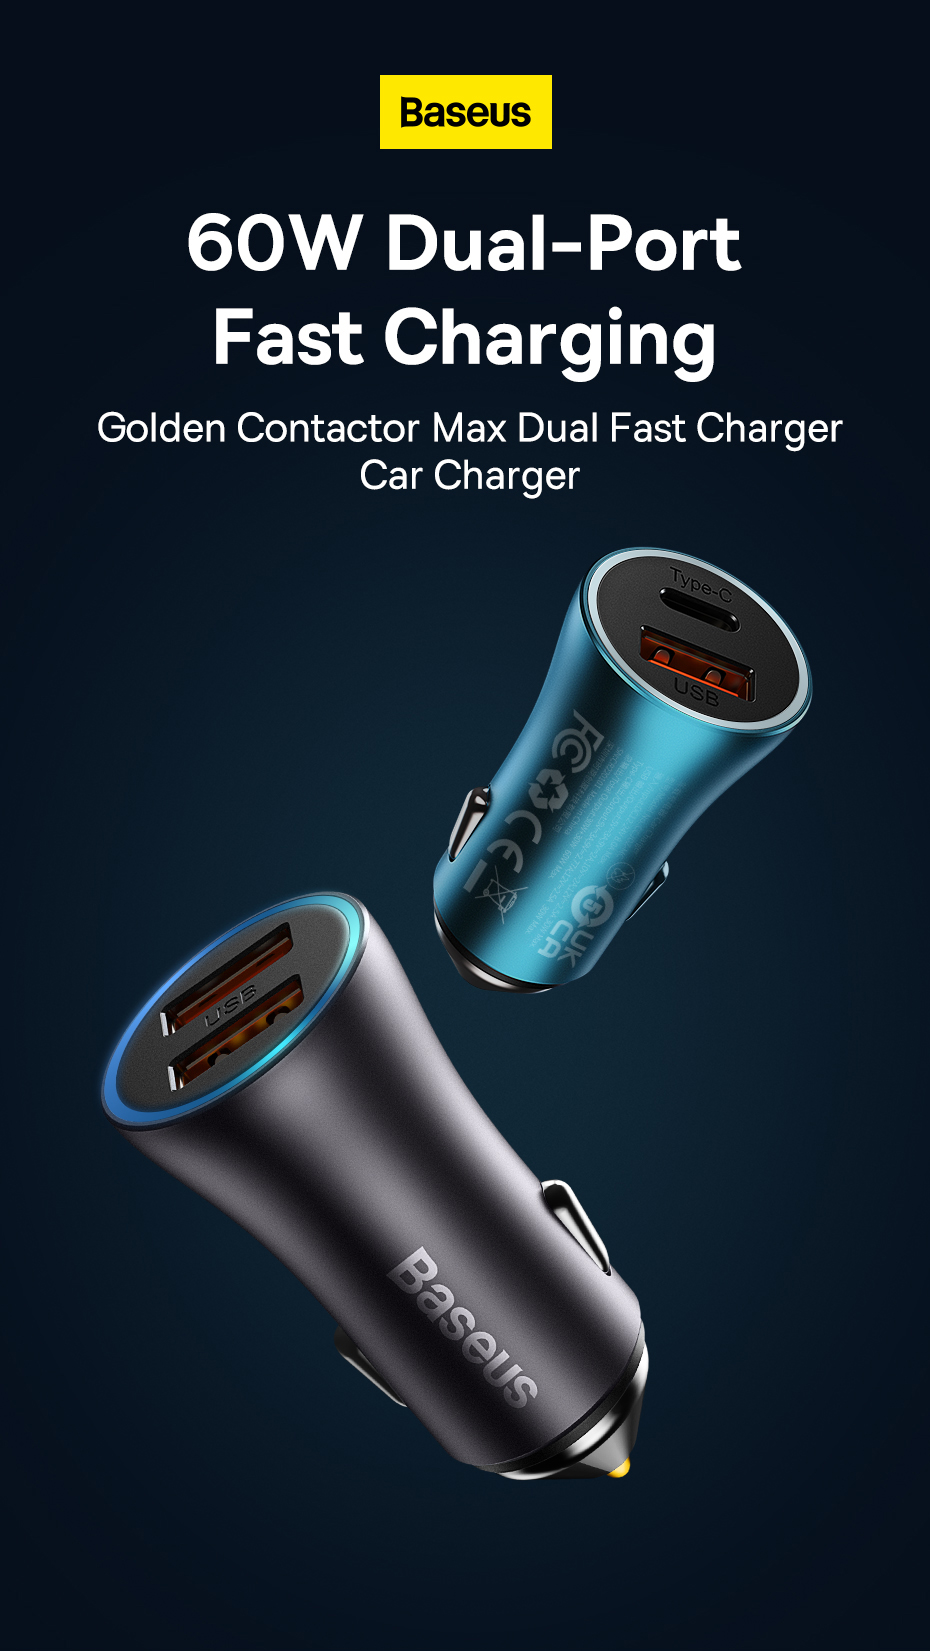 Baseus-60W-2-Port-USB-C-PD-Car-Charger-Dual-30W-QC30-PD30-Support-AFC-FCP-SCP-Fast-Charging-Metal-Ad-1938544-1